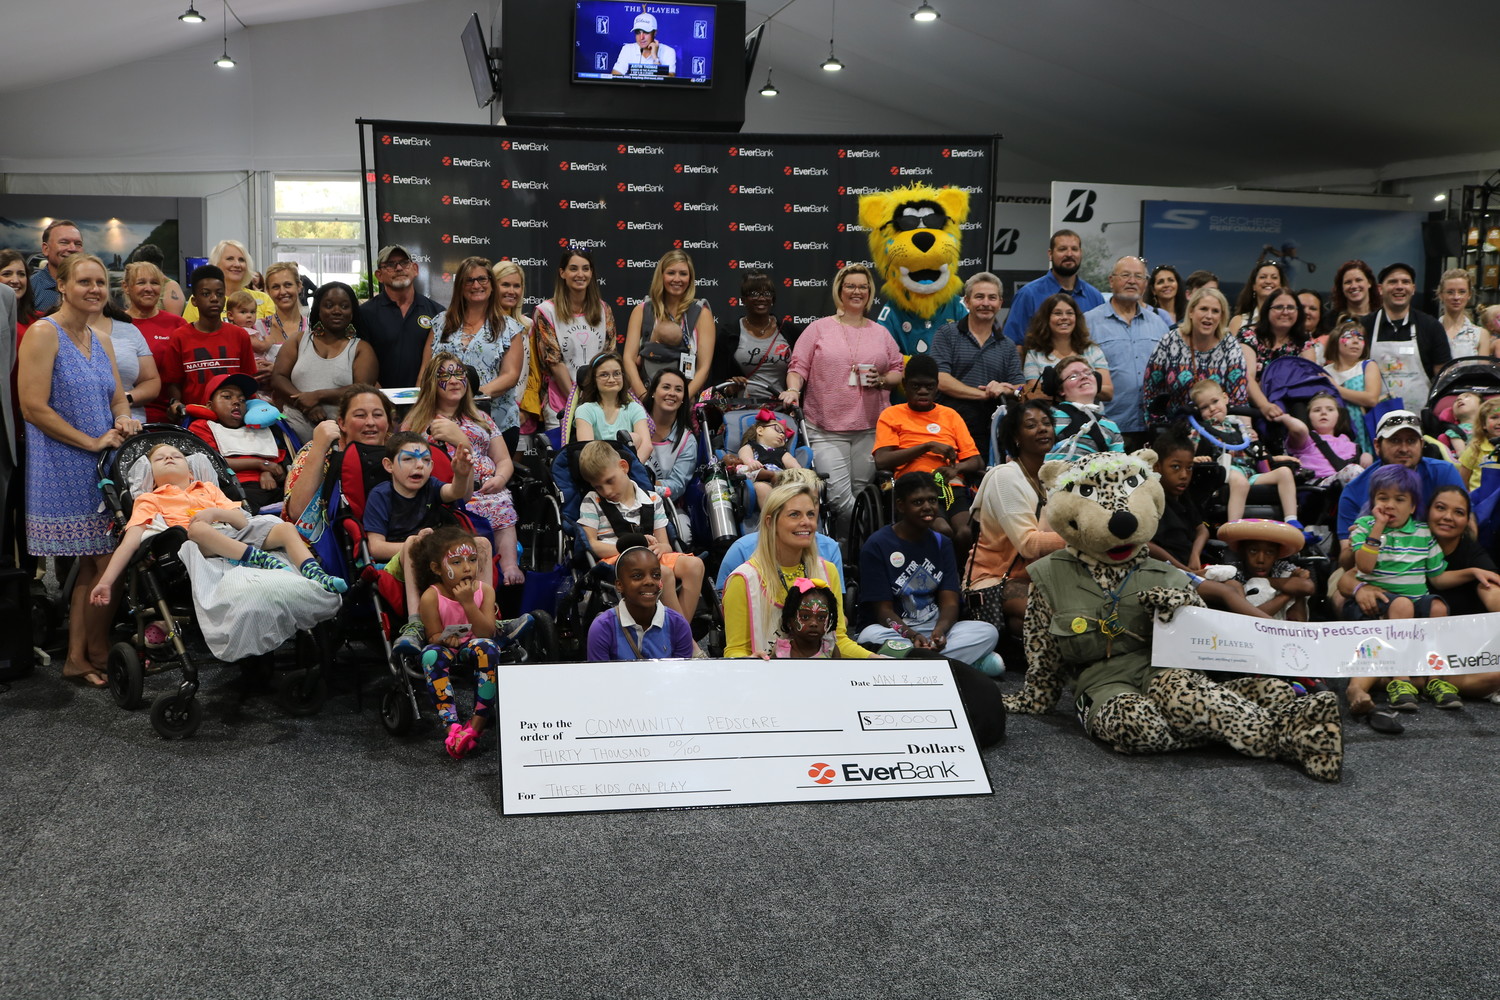 Attendees of the “These Kids Can Paint” event held May 8 at THE PLAYERS Championship pose for a photo with a $30,000 check for Community PedsCare courtesy of EverBank.